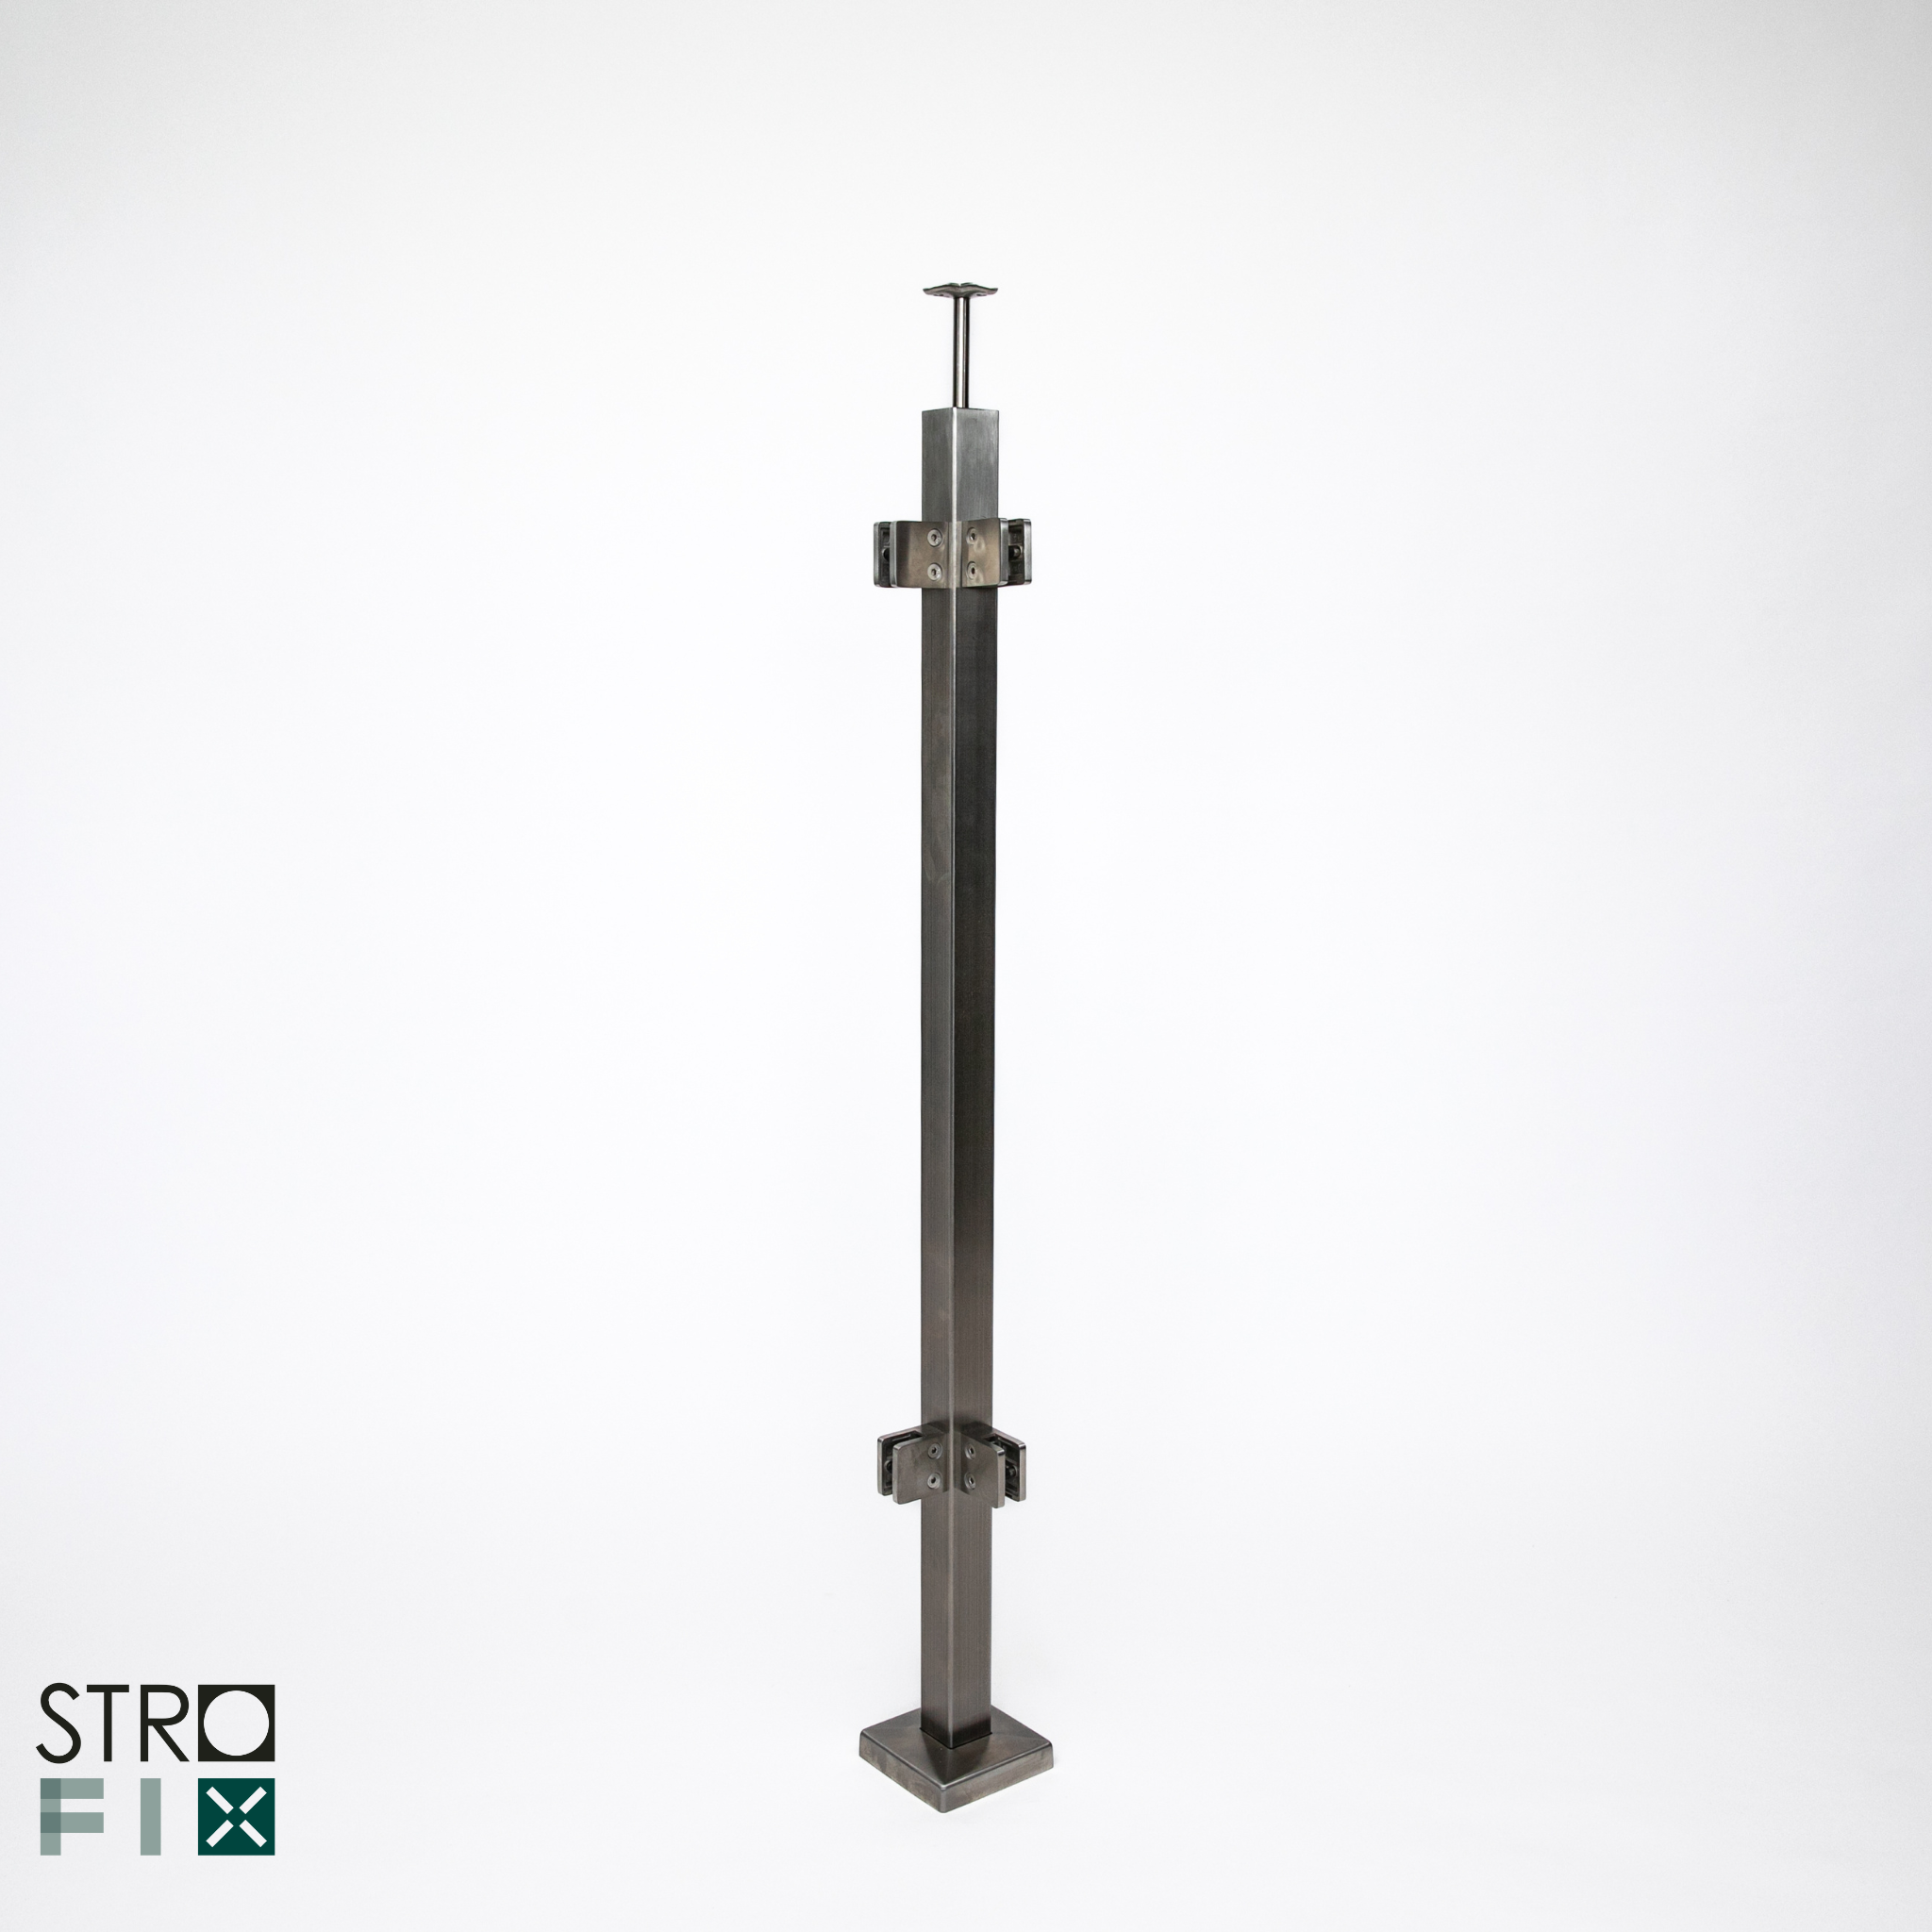 Glass railing system for a flat surface - 42.4 - StroFIX